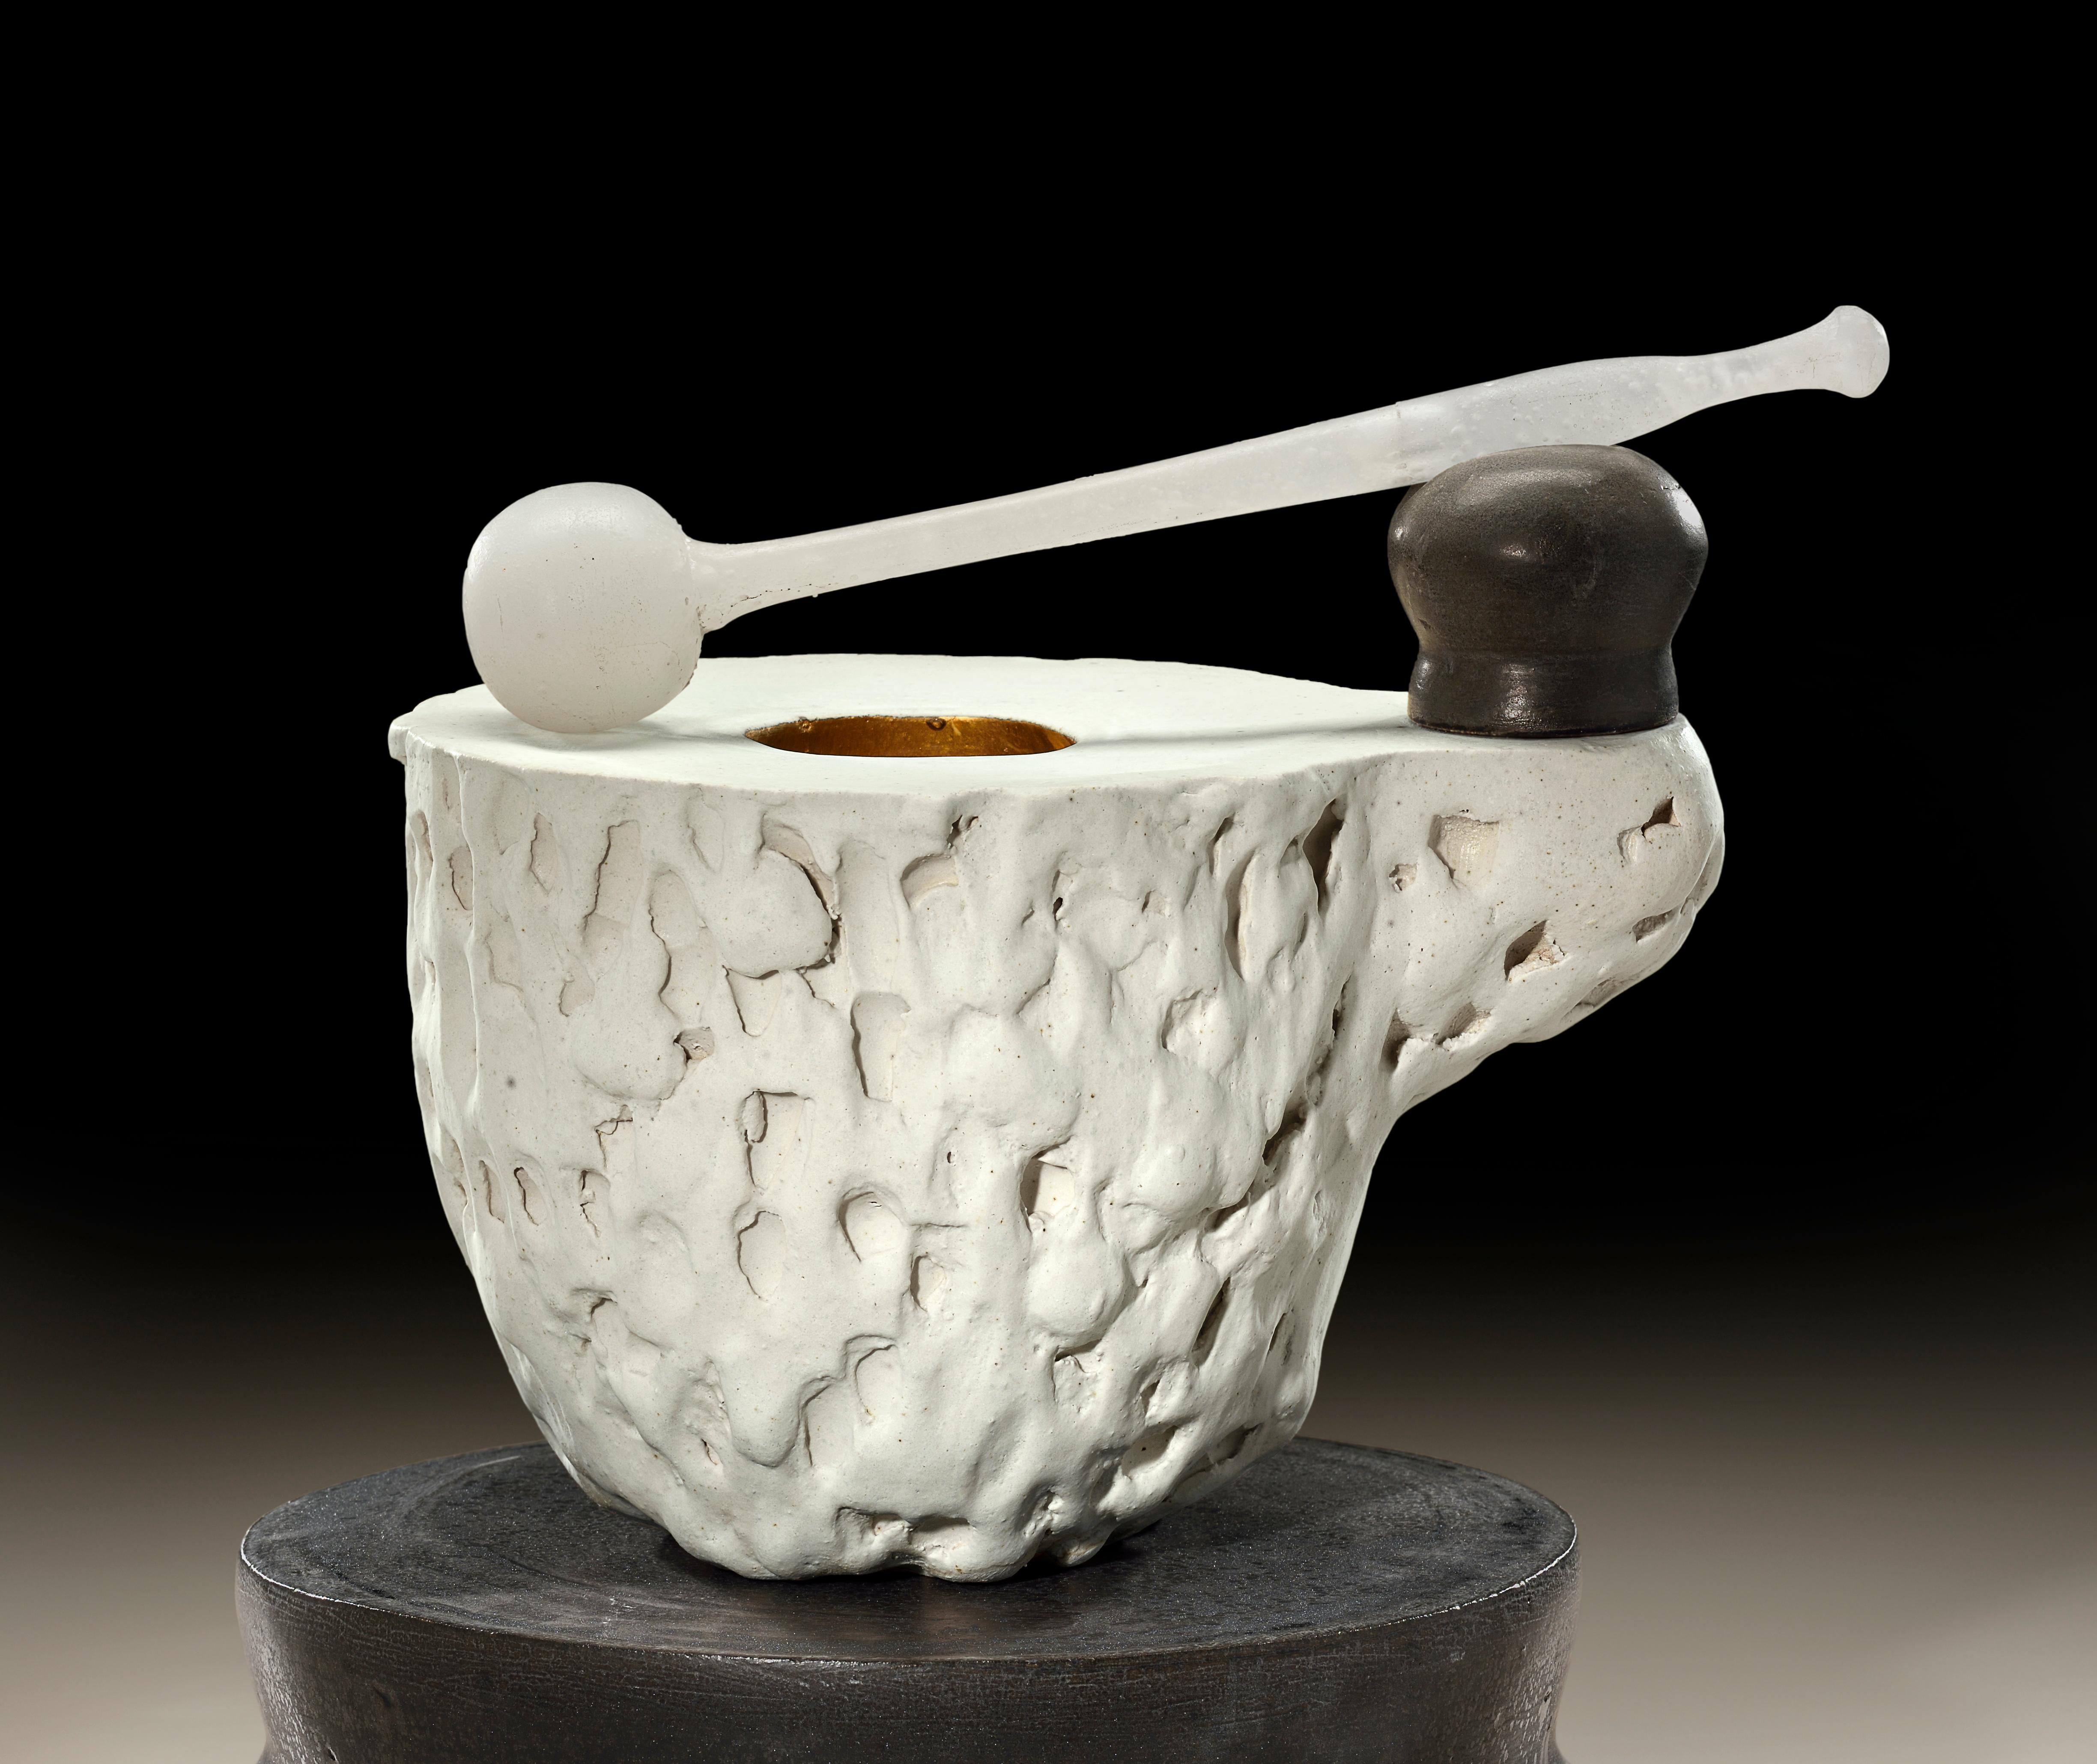 Richard Hirsch Ceramic Mortar and Glass Pestle Sculpture #1, 2020 In Excellent Condition For Sale In New York, NY